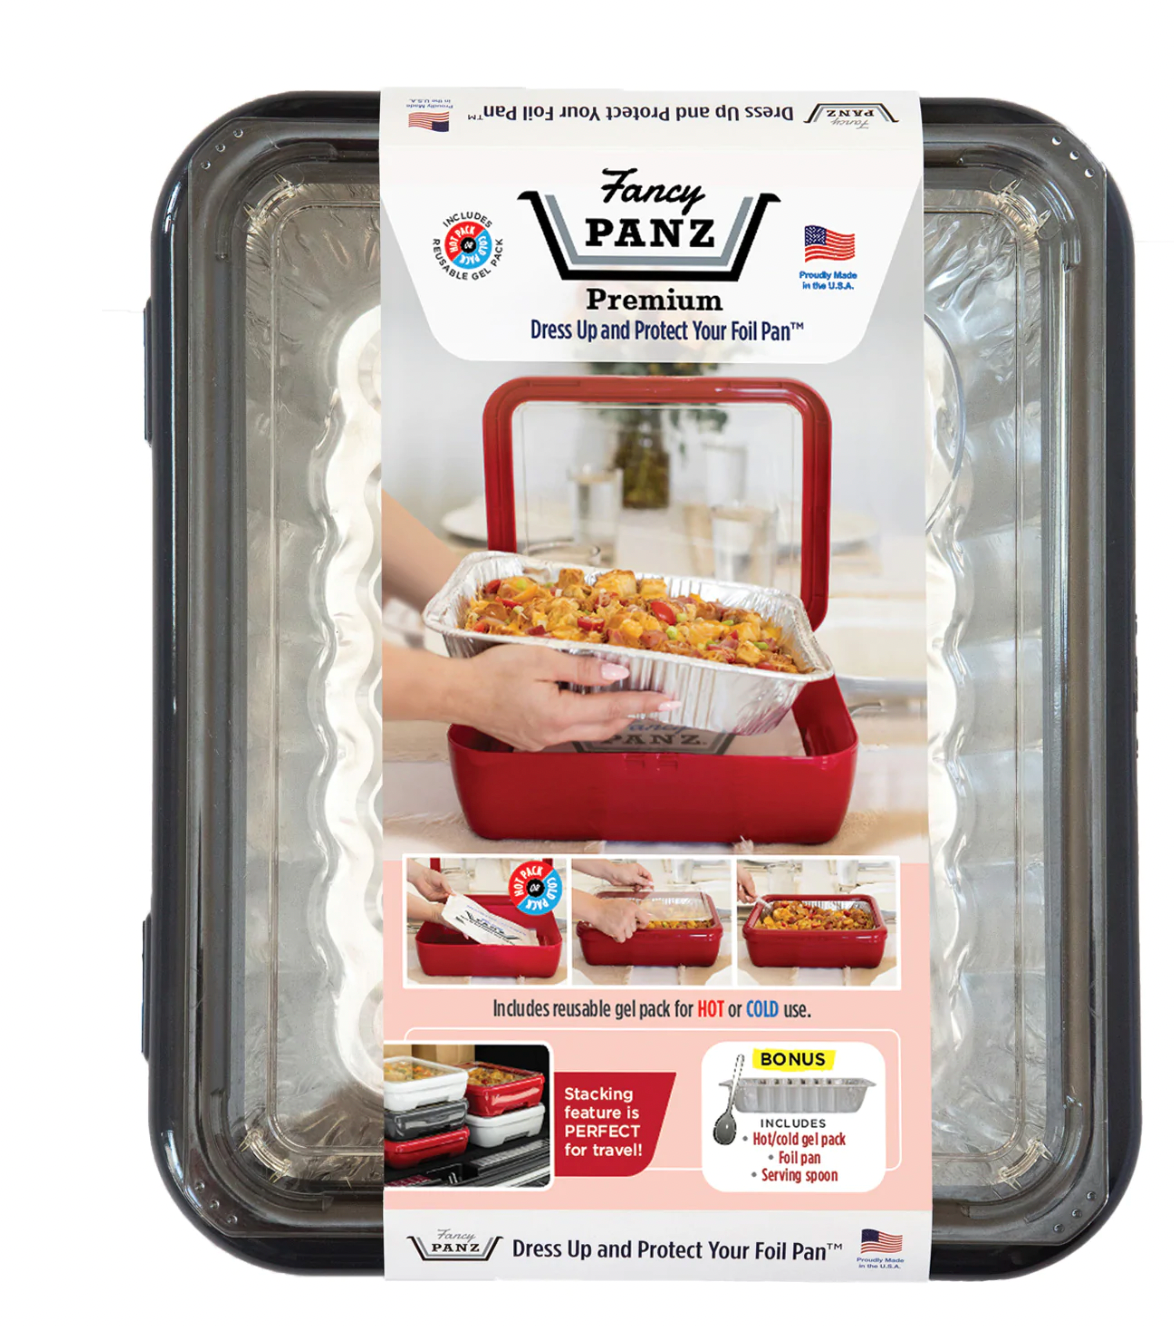 Fancy Panz 2-in-1 Dress Up & Protect Your Foil Pan, Made in USA, Fits 2  size of foil pans. Foil Pan & Serving Spoon Included. Hot or Cold Food.  Stackable for easy